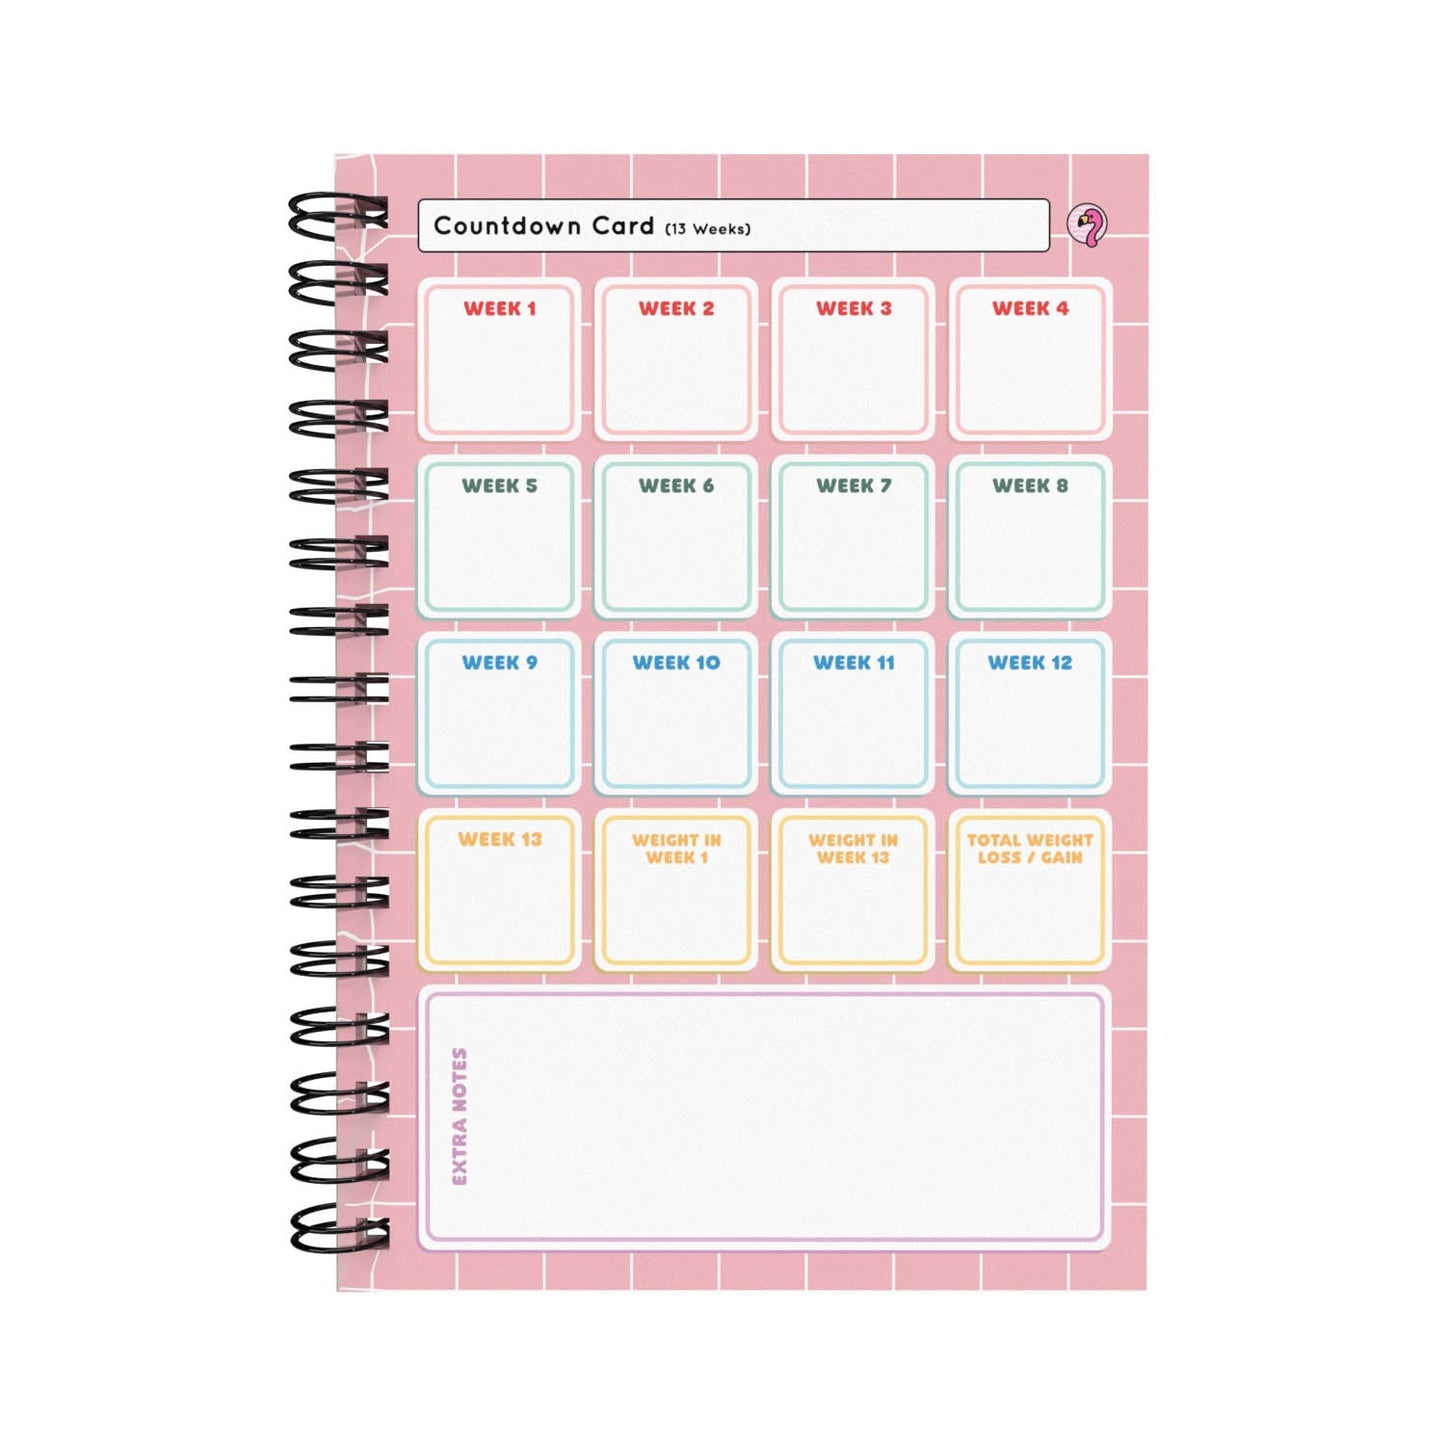 Food Diary - C39 - Slimming World Compatible - Spacious - Fabulous Planning - [W] 7WK - SP3 - C39+